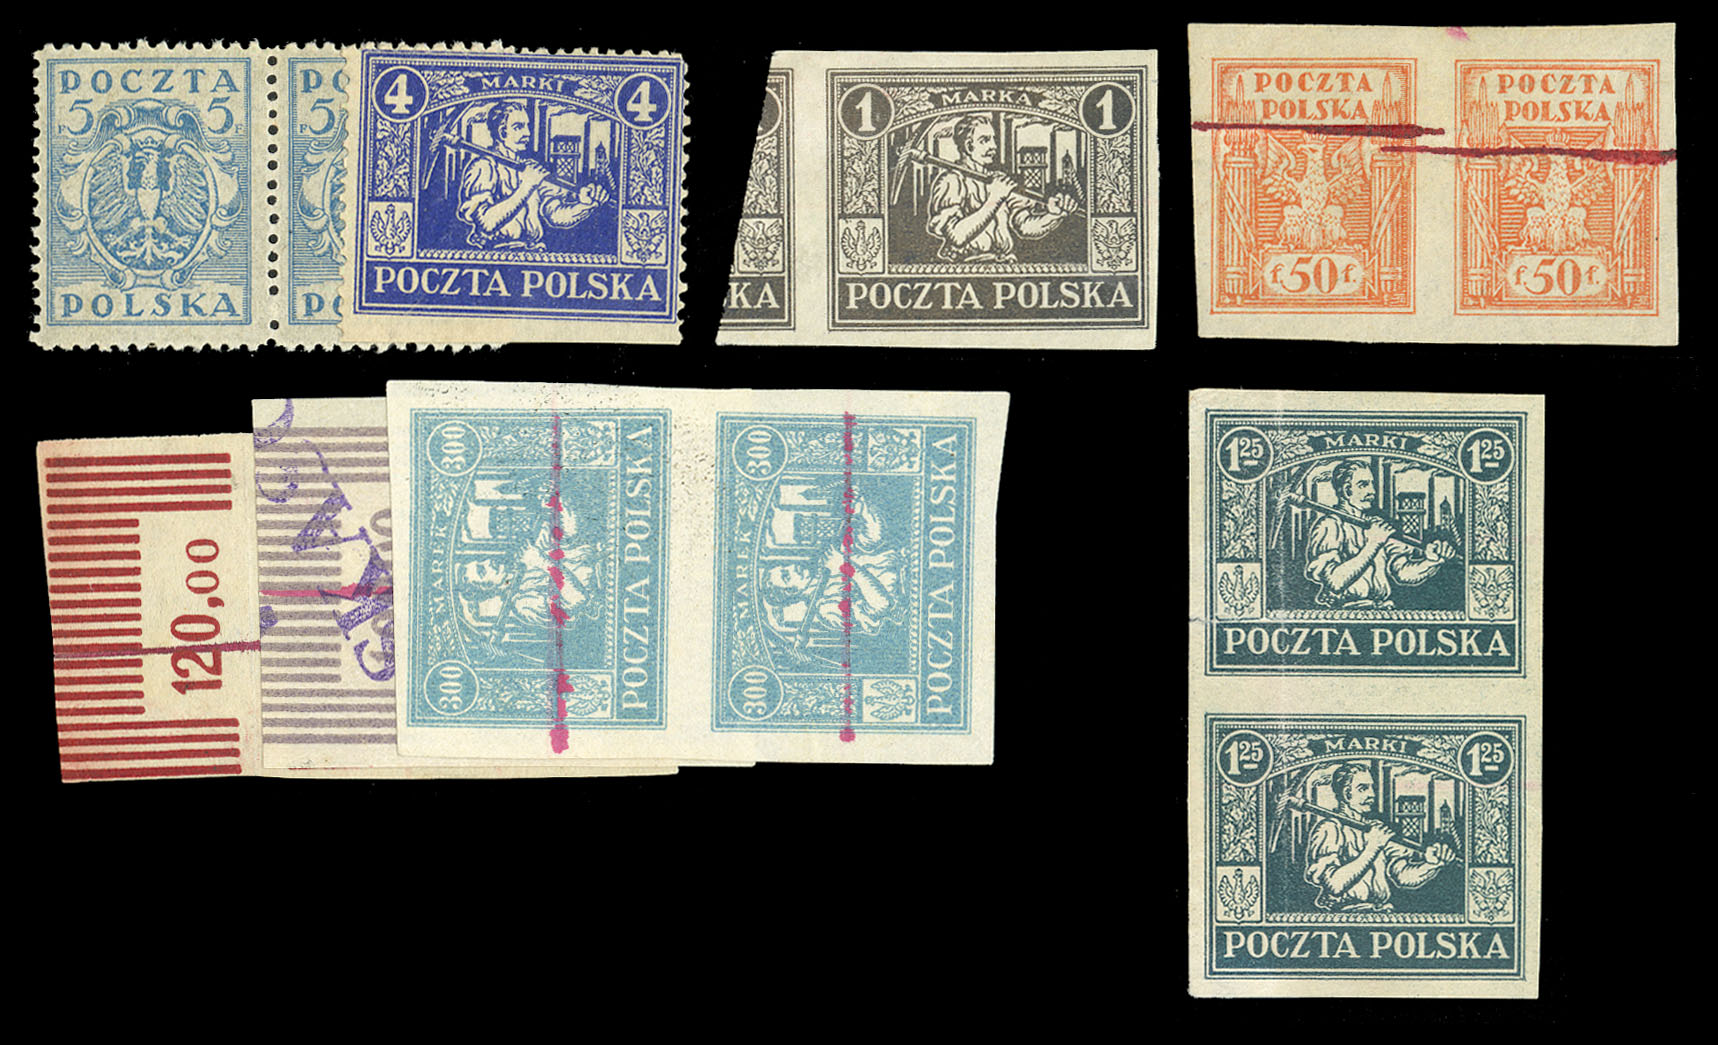 Lot 1162 - Russia  -  Cherrystone Auctions U.S. & Worldwide Stamps & Postal History